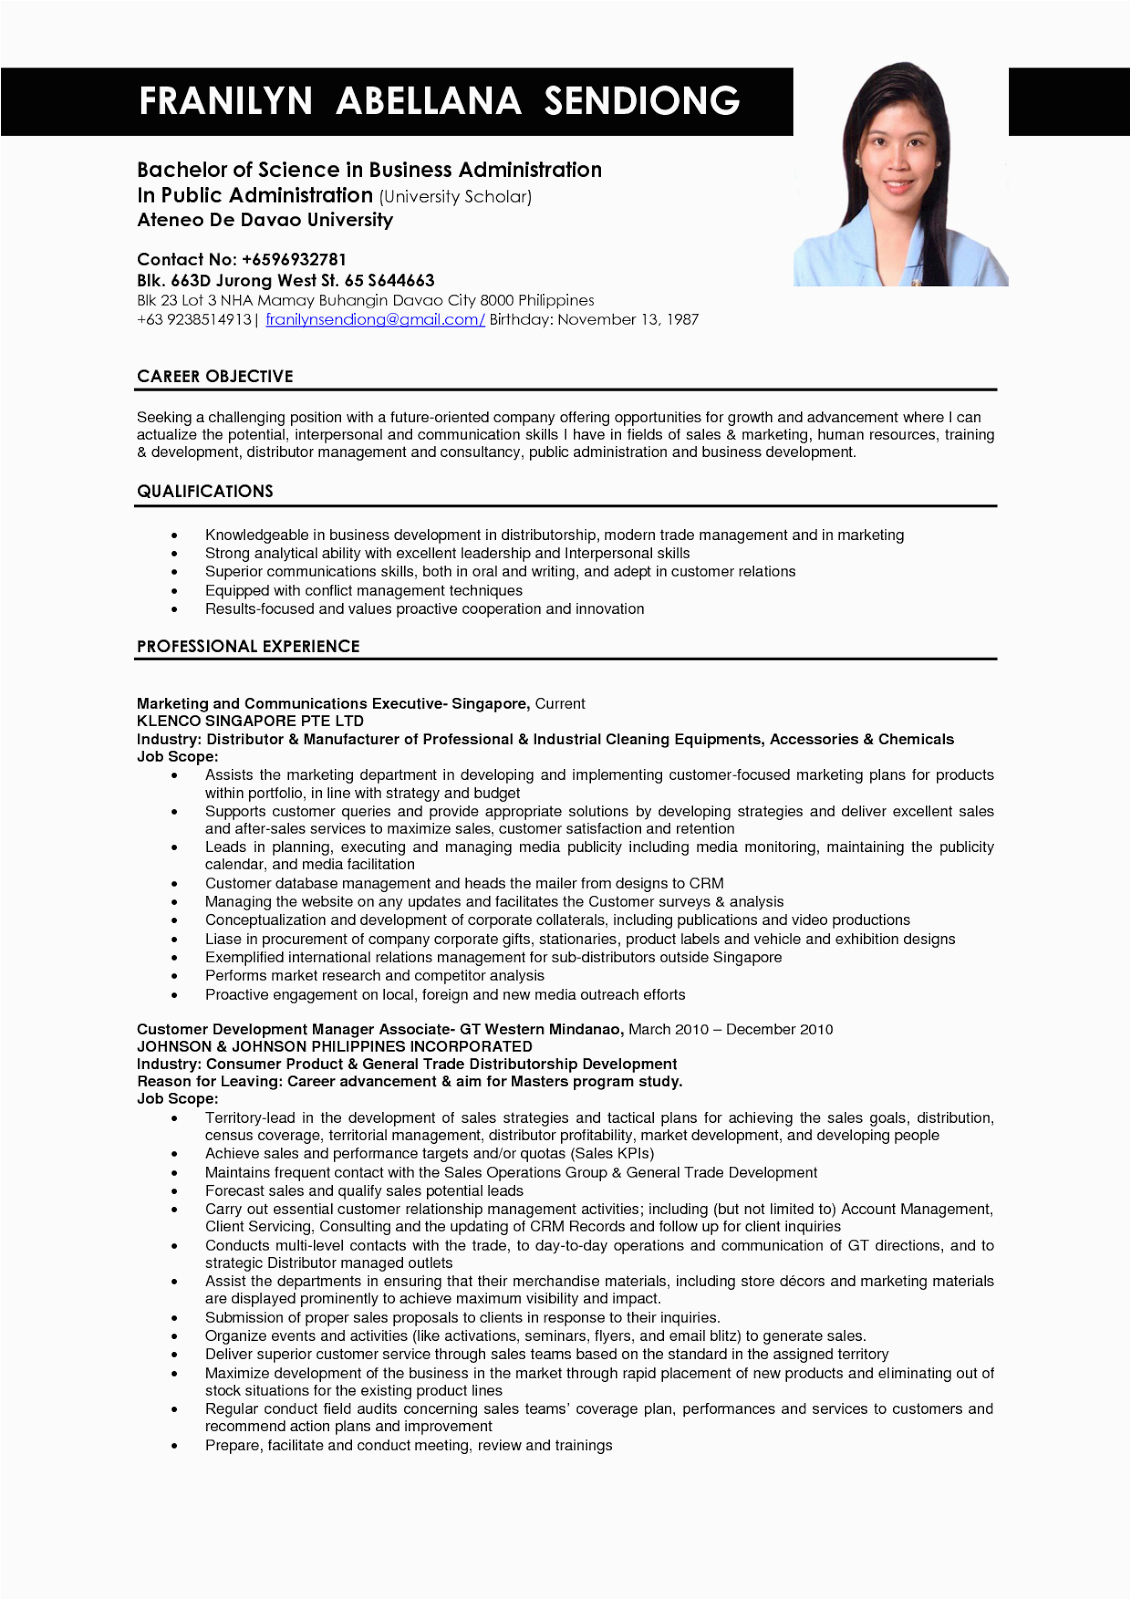 Sample Resume Objective for It Company Infolicious Resume Template for Mac Pages Resume Templates for Mac Word